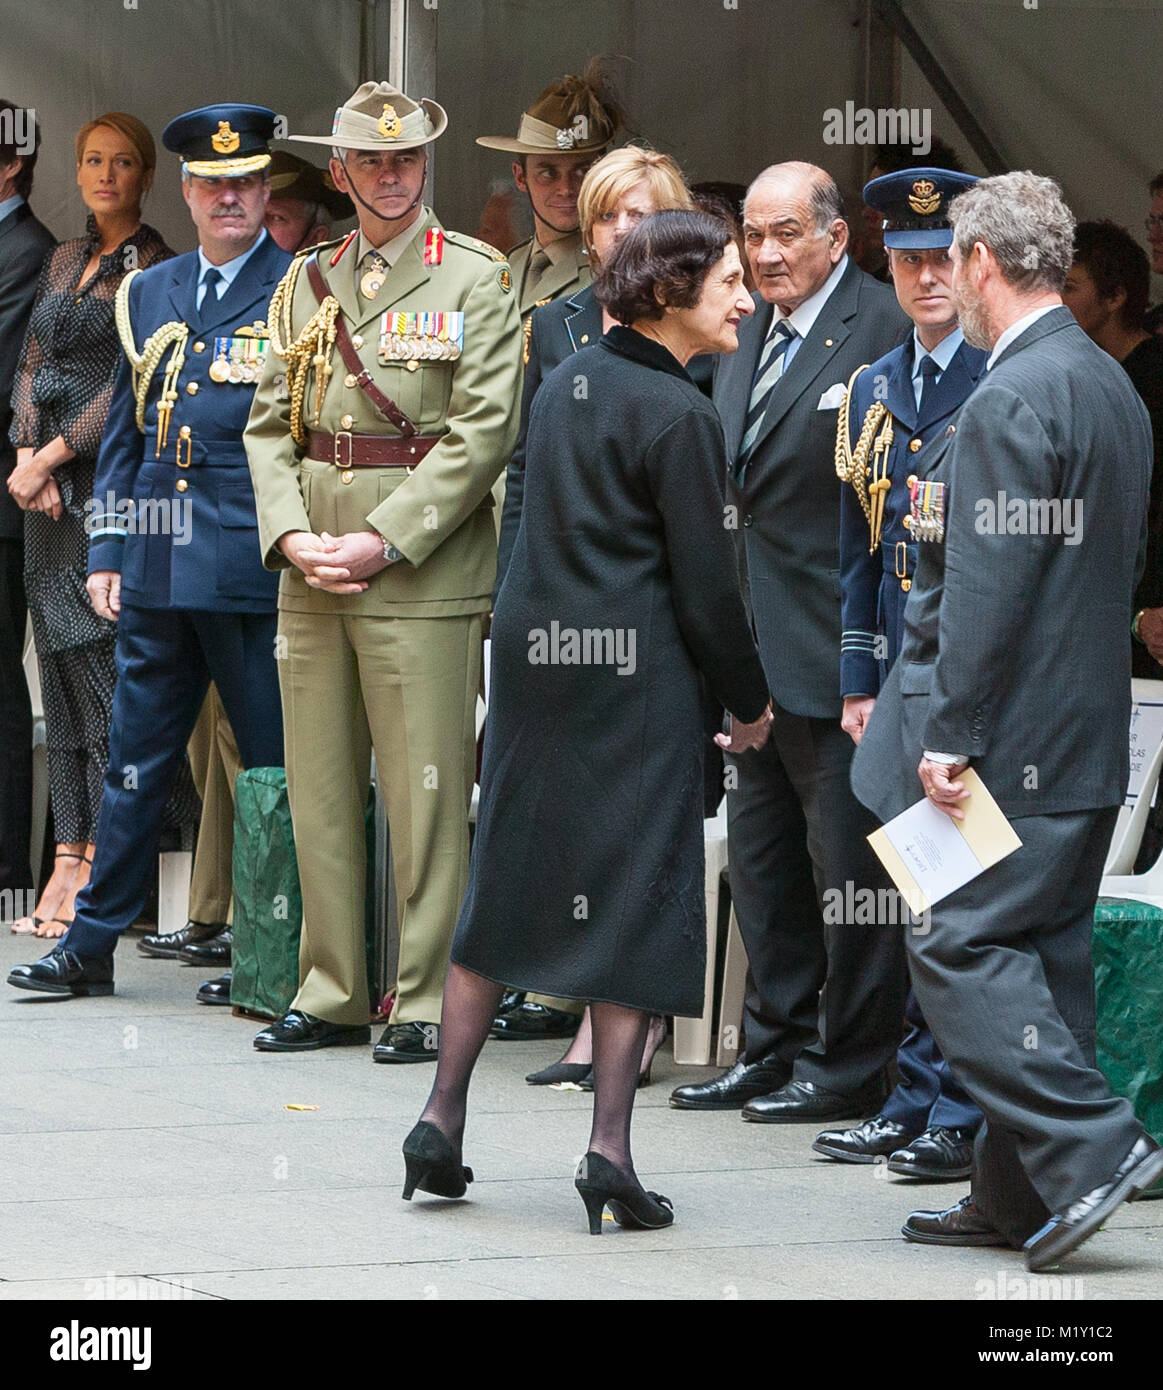 Legacy Week is launched at Martin Place in Sydney Australia for 2006. The popular annual event is well-known throughout Australia for the badge sellers who collect funds from the public to assist Australia's returned services staff and their relatives. Pictured: Marie Bashir and guests. Stock Photo